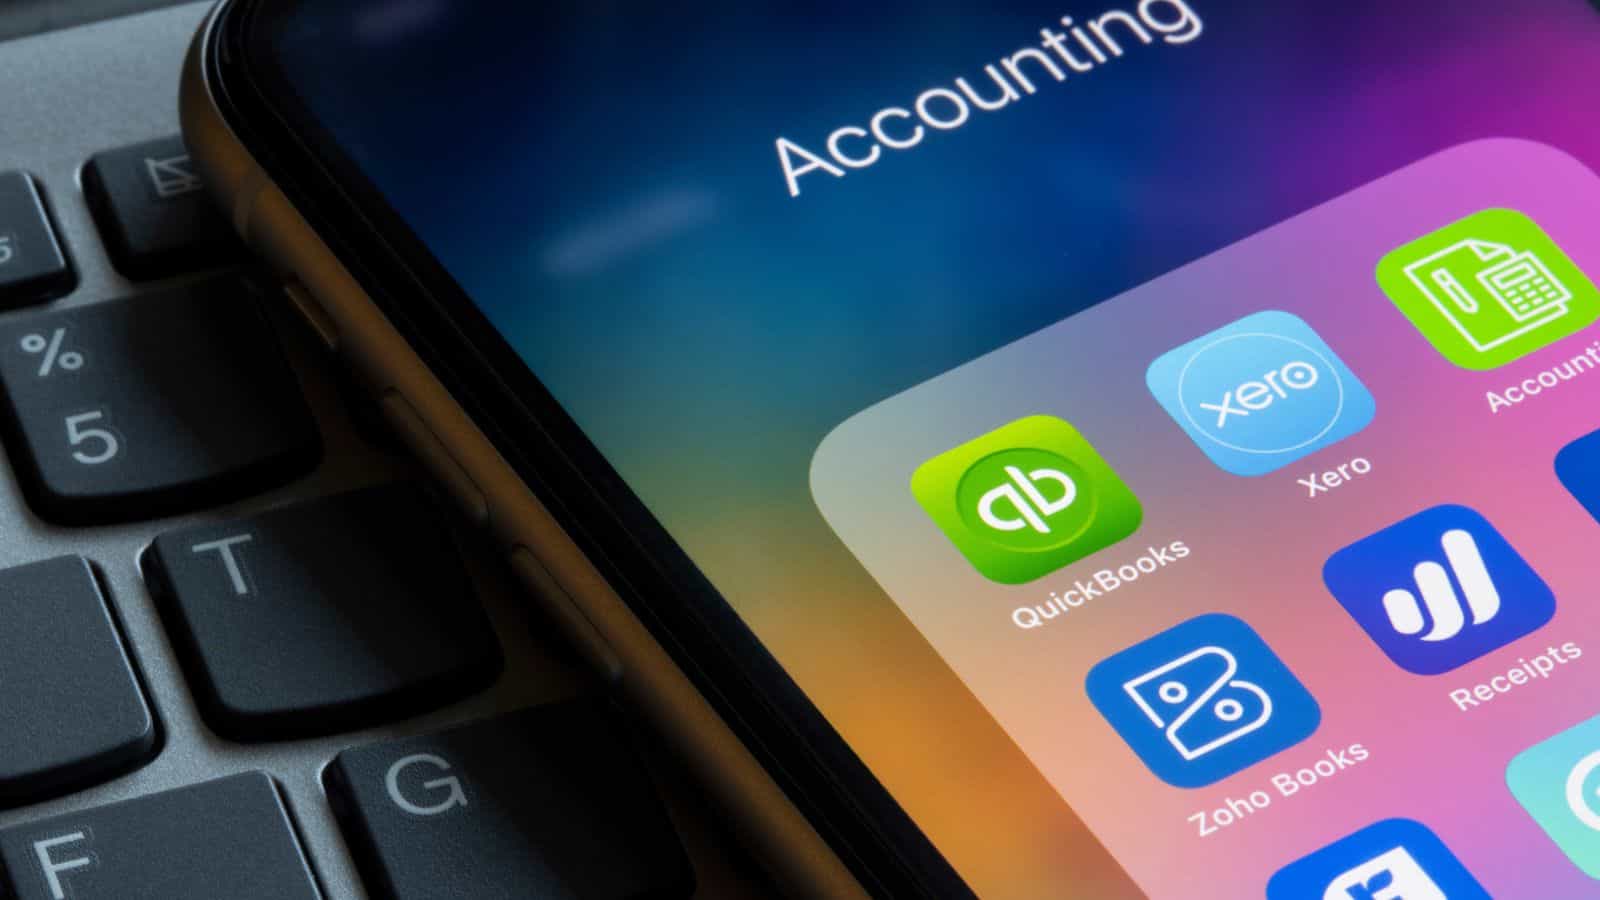 A smart device with accounting software apps ready to use.